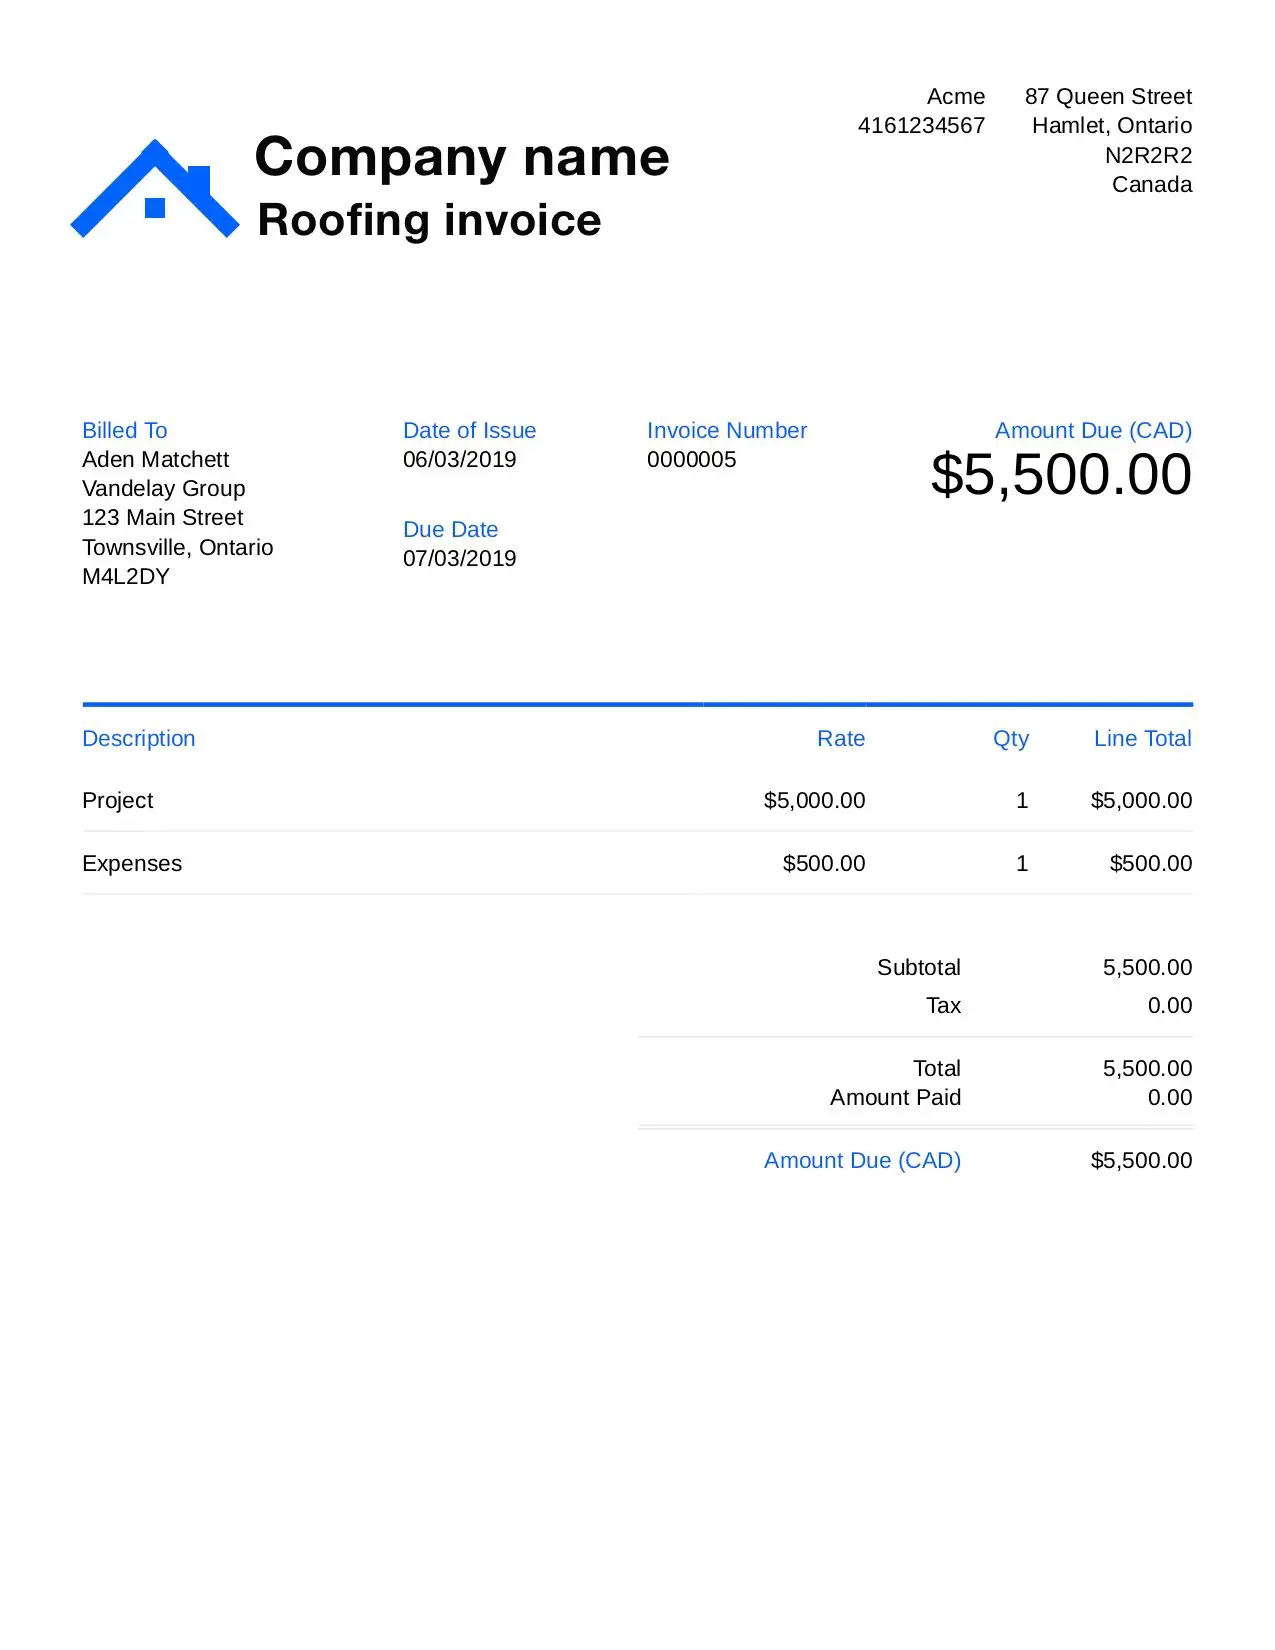 Free Roofing Invoice Template. Customize and Send in 90 Seconds